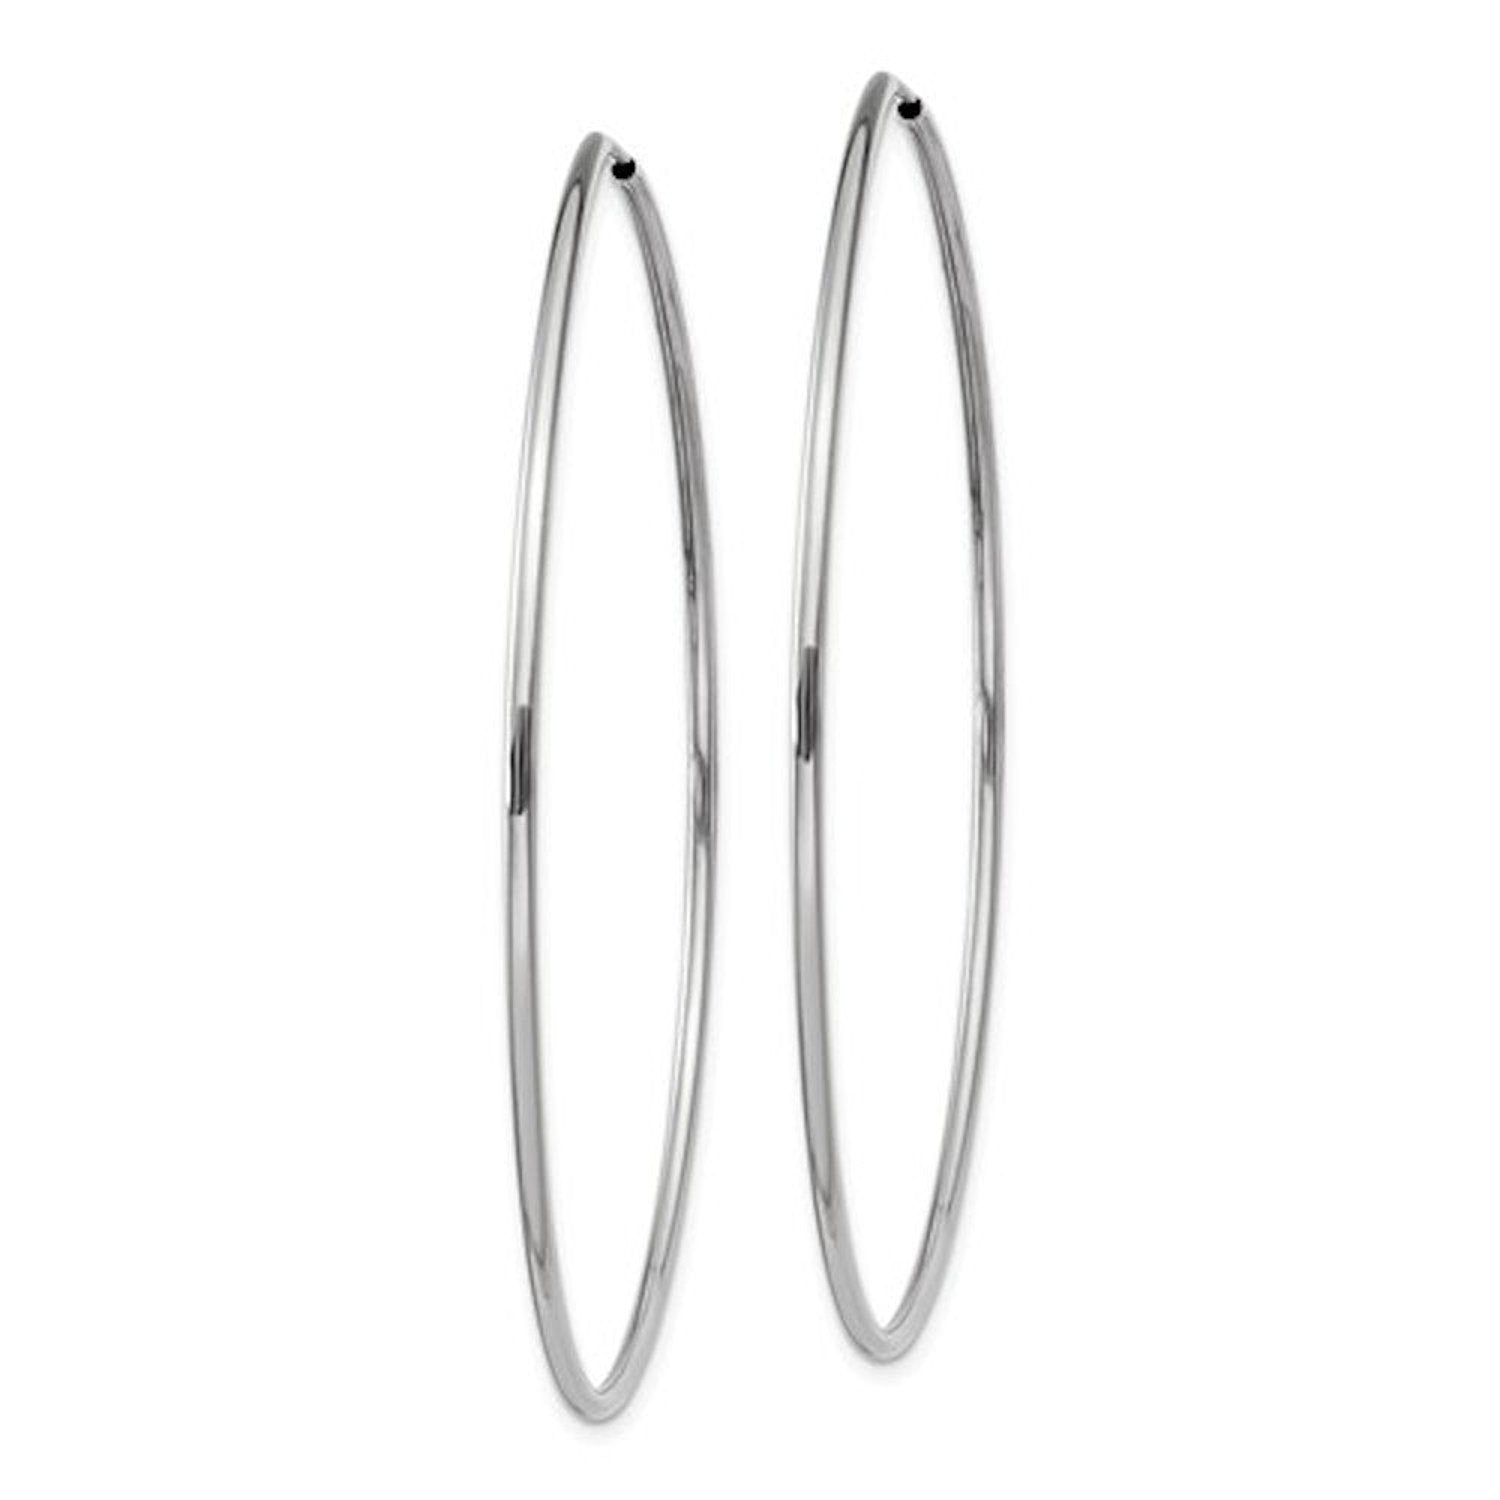 14k White Gold Large Round Endless Hoop Earrings 60mm x 1.20mm